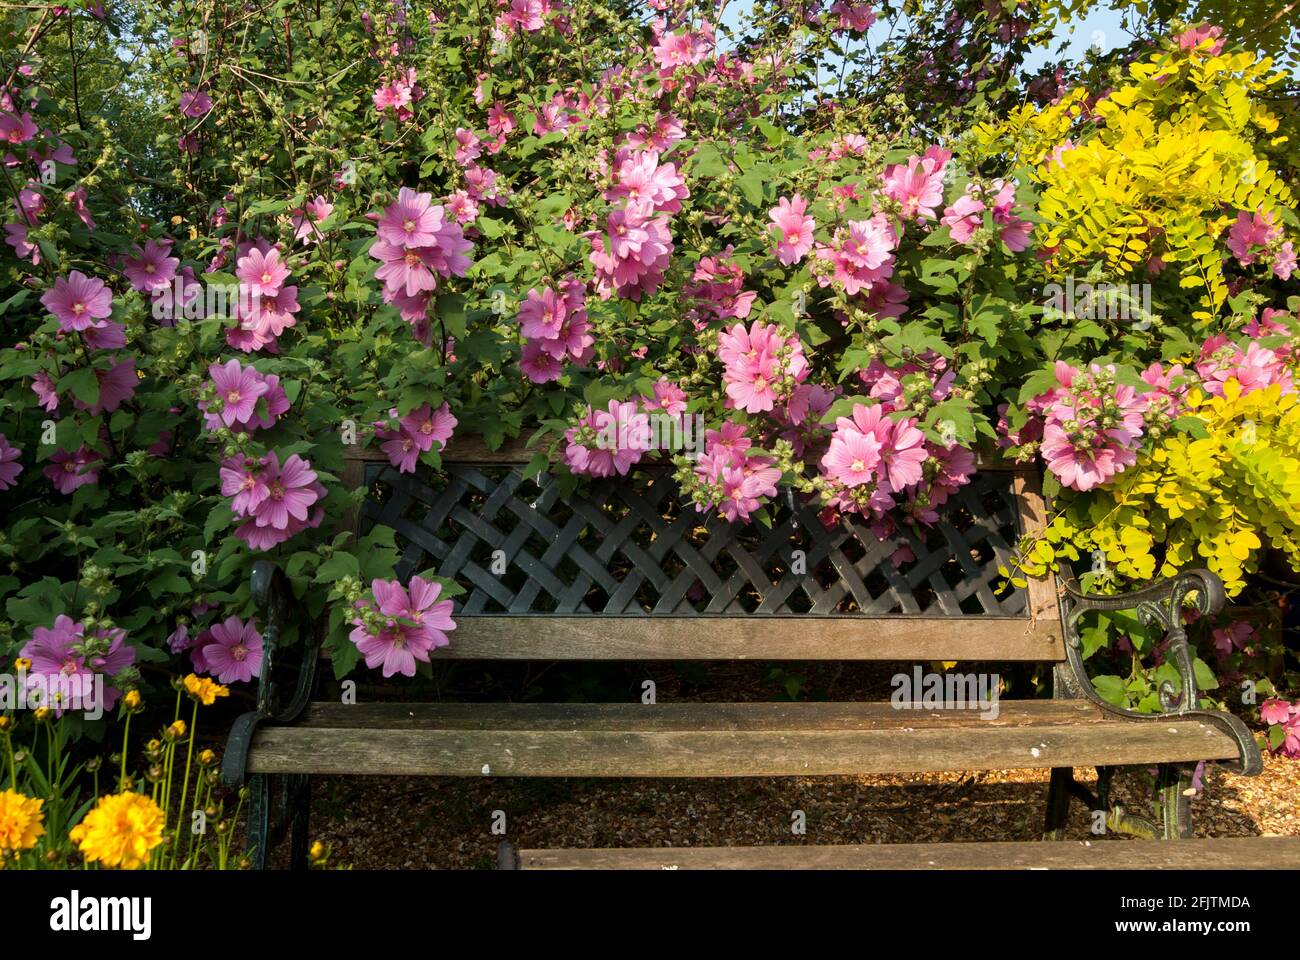 A wood and wrought iron garden bench swamped by a pink, flowering  lavatera / mallow shrub in a sunny garden in June in the UK Stock Photo